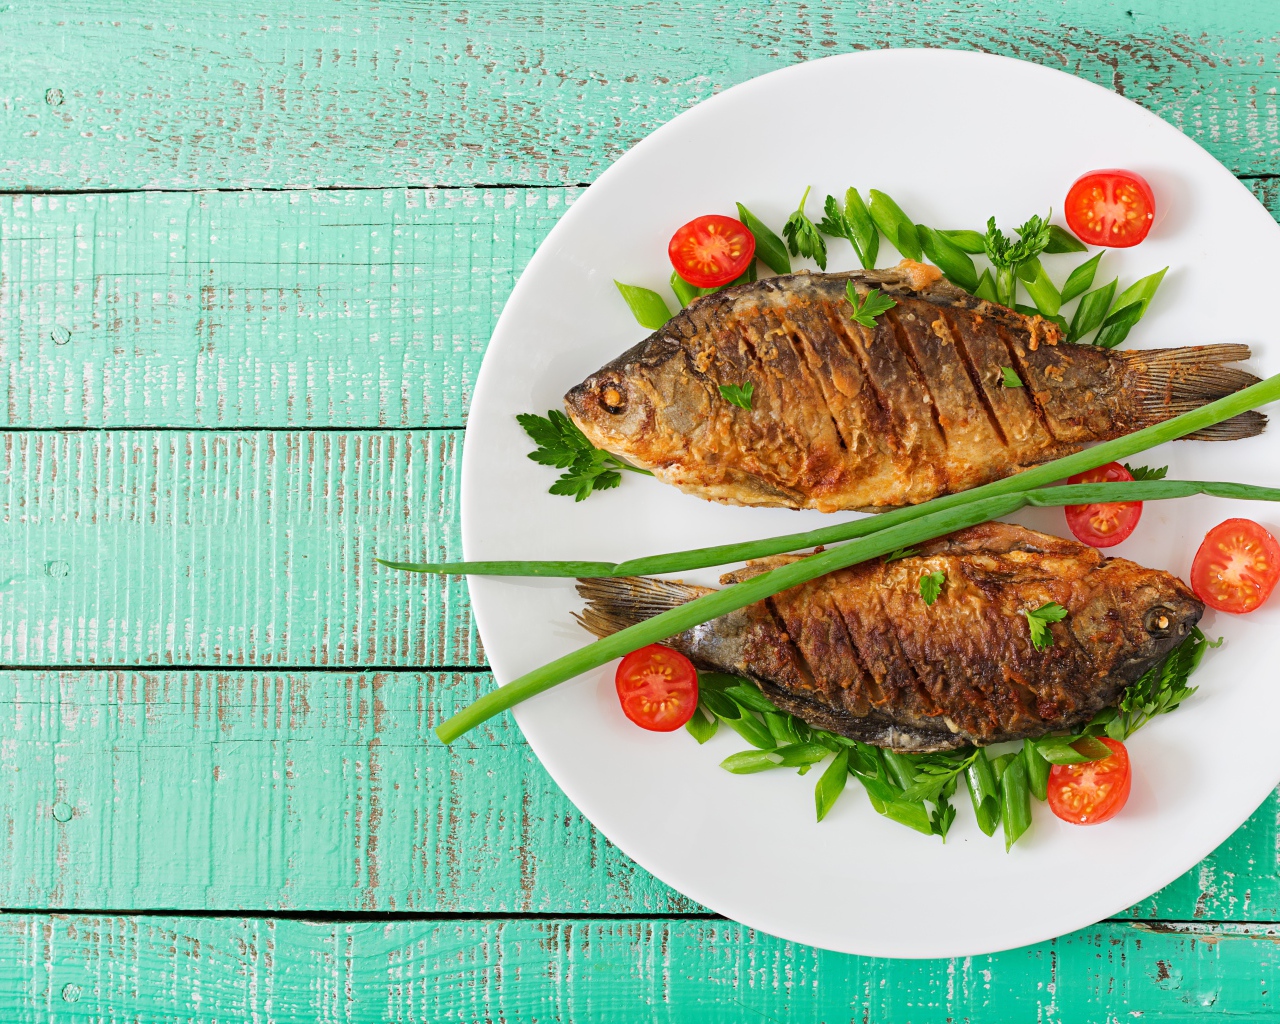 Fried fish with tomatoes and herbs on the table